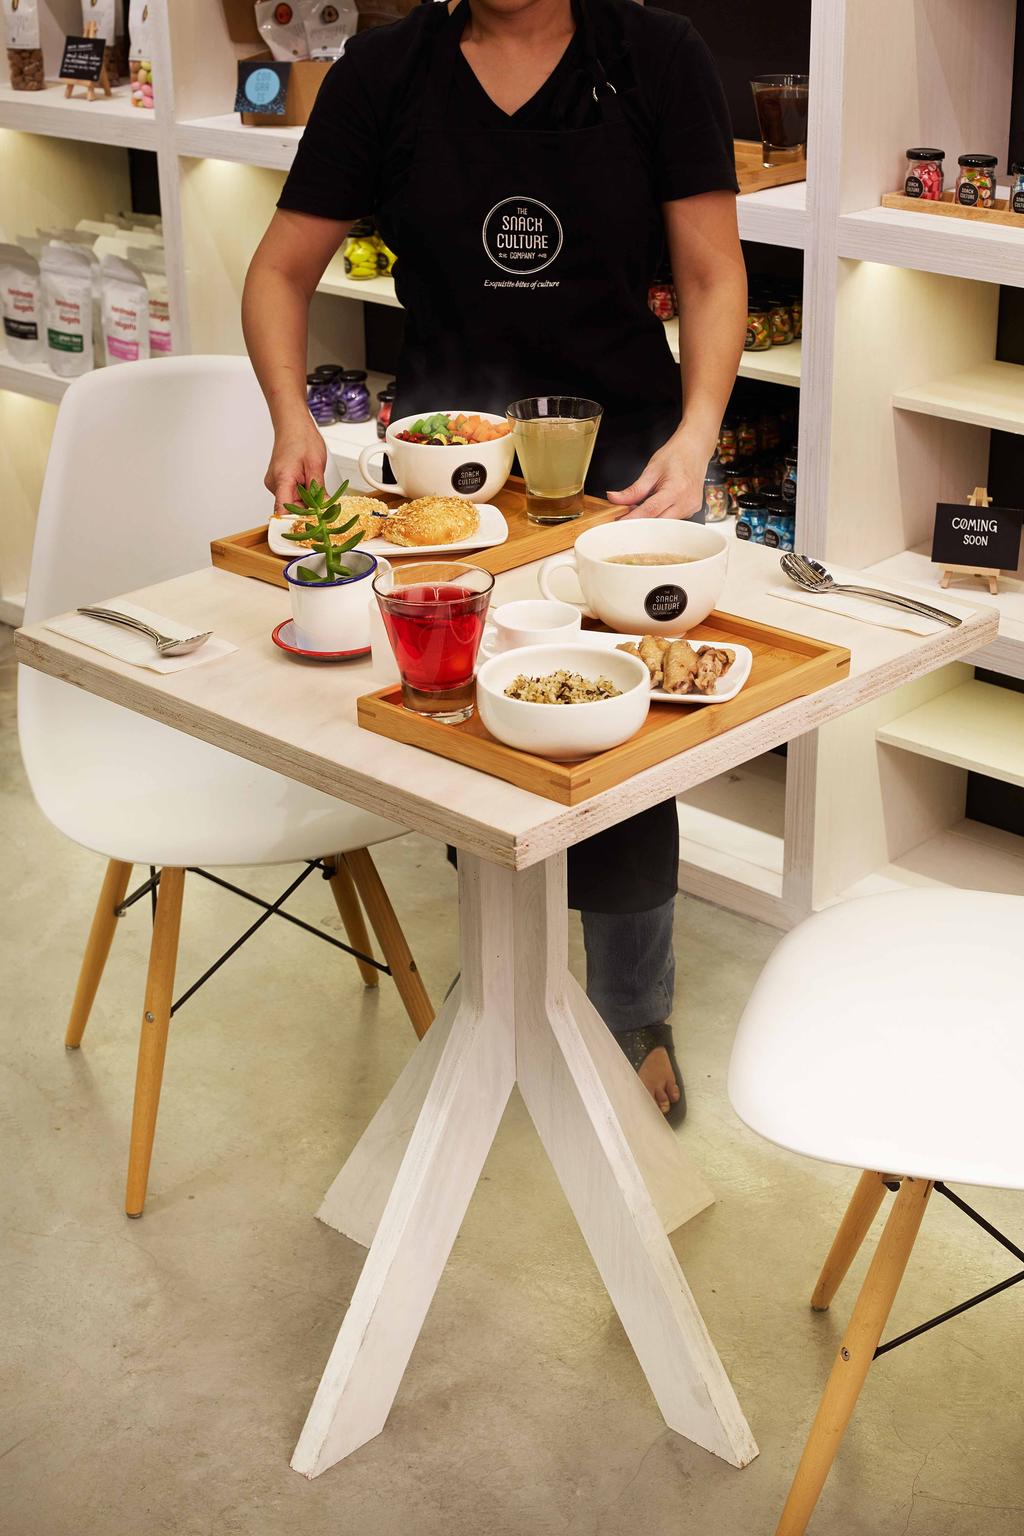 Snack Culture, Commercial, Architect, asolidplan, Modern, White Dining Table, Small Dining Table, Small White Dining Table, White Chair, White Chair With Wooden Legs, Cup, Bowl, Dining Table, Furniture, Table, Breakfast, Food, Meal